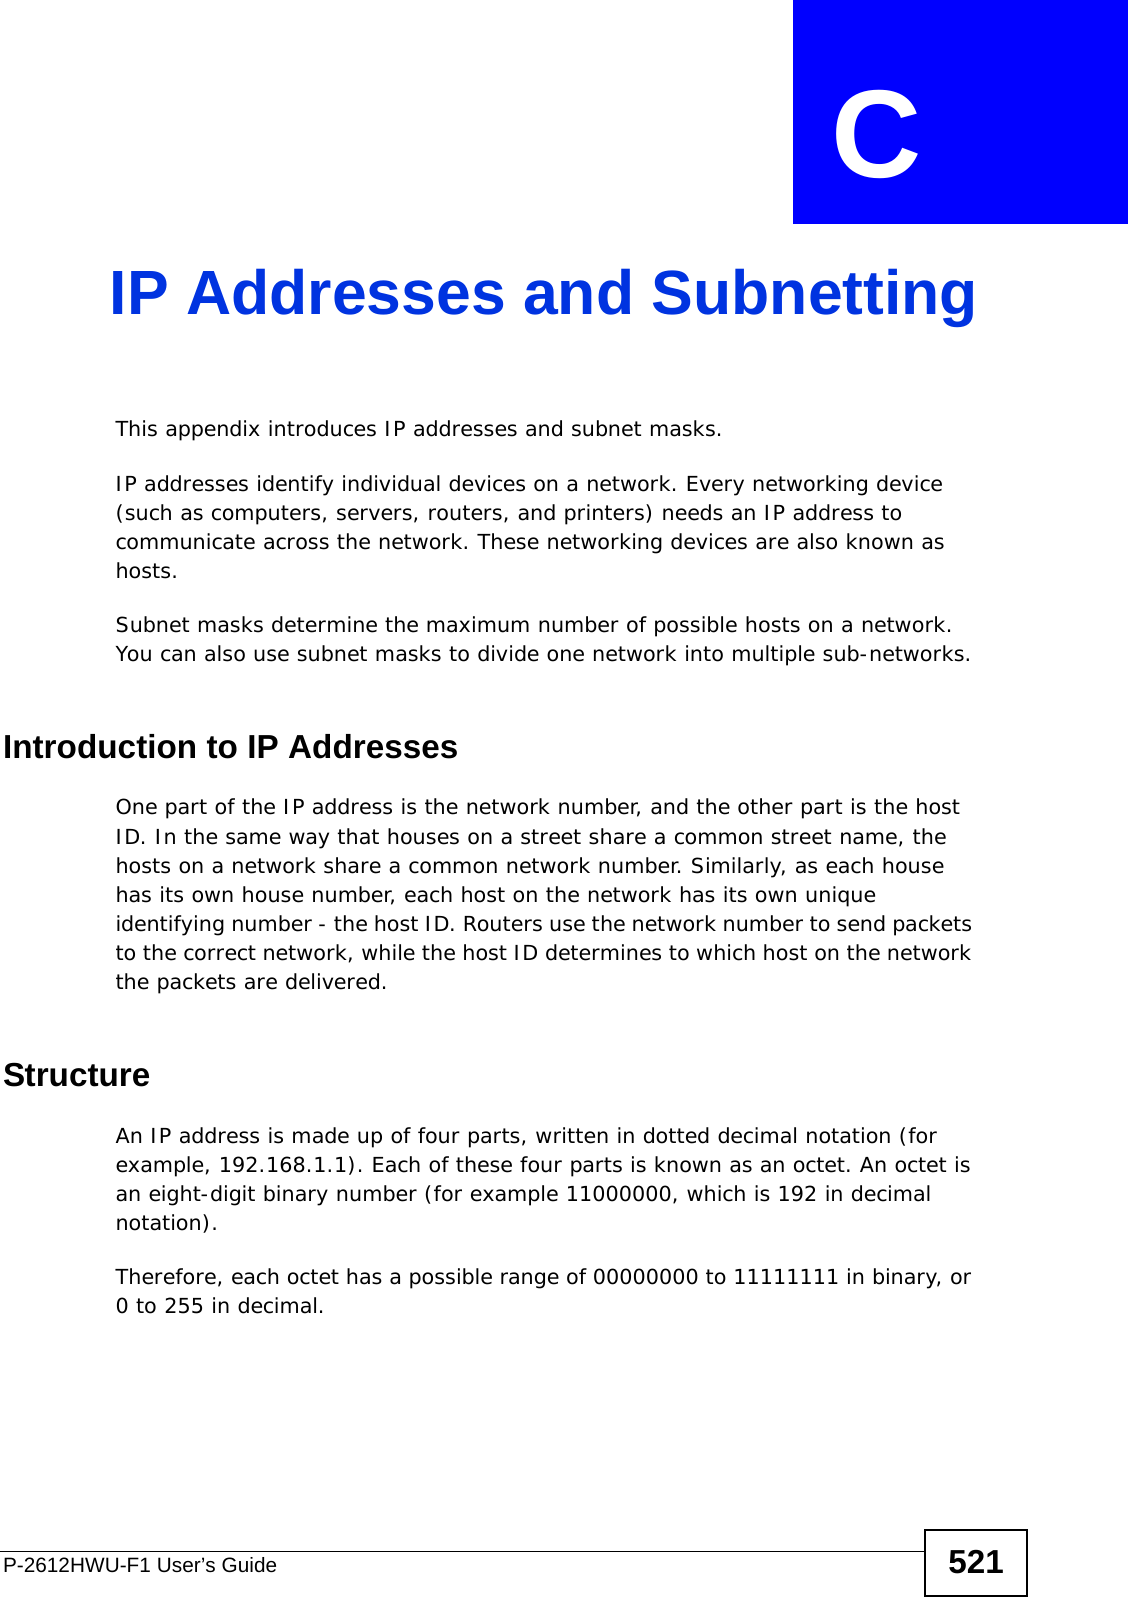 P-2612HWU-F1 User’s Guide 521APPENDIX  C IP Addresses and SubnettingThis appendix introduces IP addresses and subnet masks. IP addresses identify individual devices on a network. Every networking device (such as computers, servers, routers, and printers) needs an IP address to communicate across the network. These networking devices are also known as hosts.Subnet masks determine the maximum number of possible hosts on a network. You can also use subnet masks to divide one network into multiple sub-networks.Introduction to IP AddressesOne part of the IP address is the network number, and the other part is the host ID. In the same way that houses on a street share a common street name, the hosts on a network share a common network number. Similarly, as each house has its own house number, each host on the network has its own unique identifying number - the host ID. Routers use the network number to send packets to the correct network, while the host ID determines to which host on the network the packets are delivered.StructureAn IP address is made up of four parts, written in dotted decimal notation (for example, 192.168.1.1). Each of these four parts is known as an octet. An octet is an eight-digit binary number (for example 11000000, which is 192 in decimal notation). Therefore, each octet has a possible range of 00000000 to 11111111 in binary, or 0 to 255 in decimal.